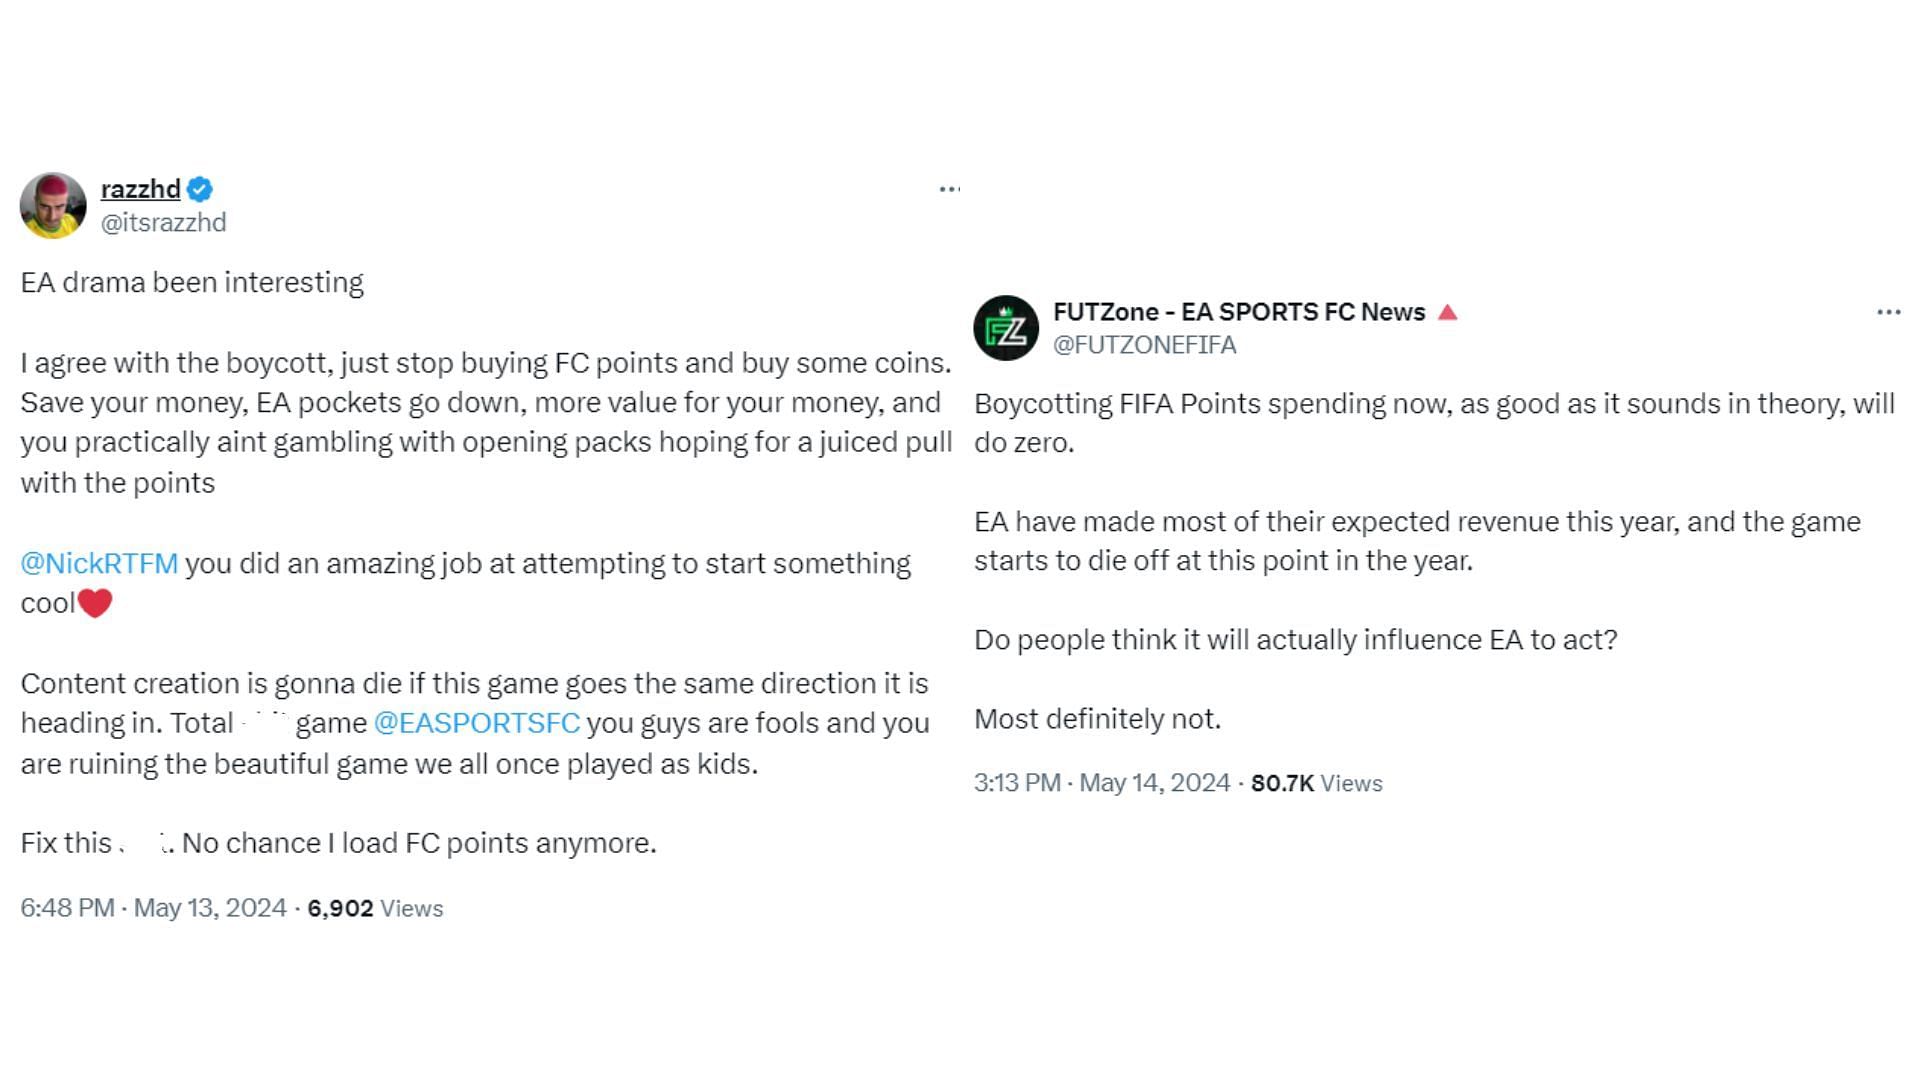 The discussion and concerns continue among players (Image via Twitter)